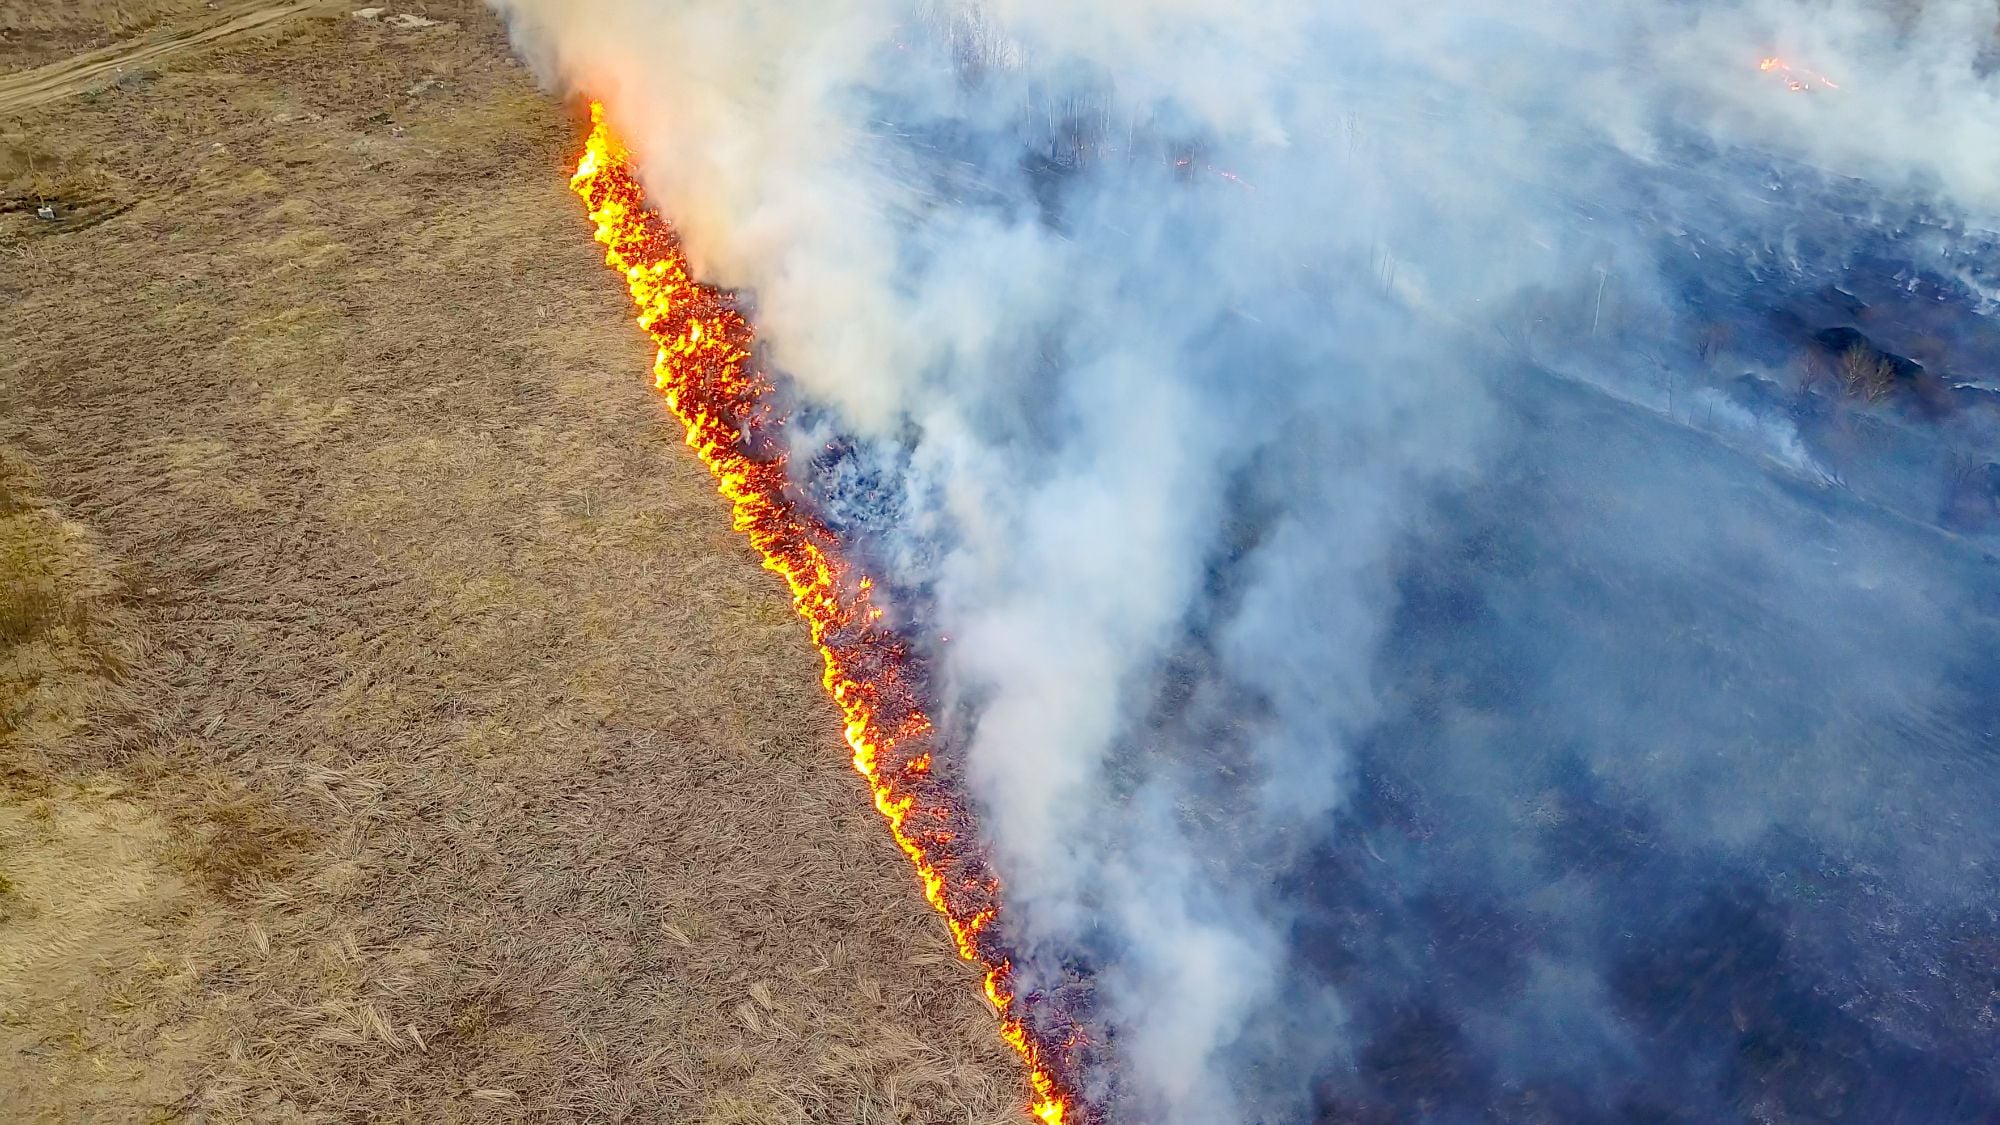 Aerial view of a wildfire ravaging drylands across the Western United States. 